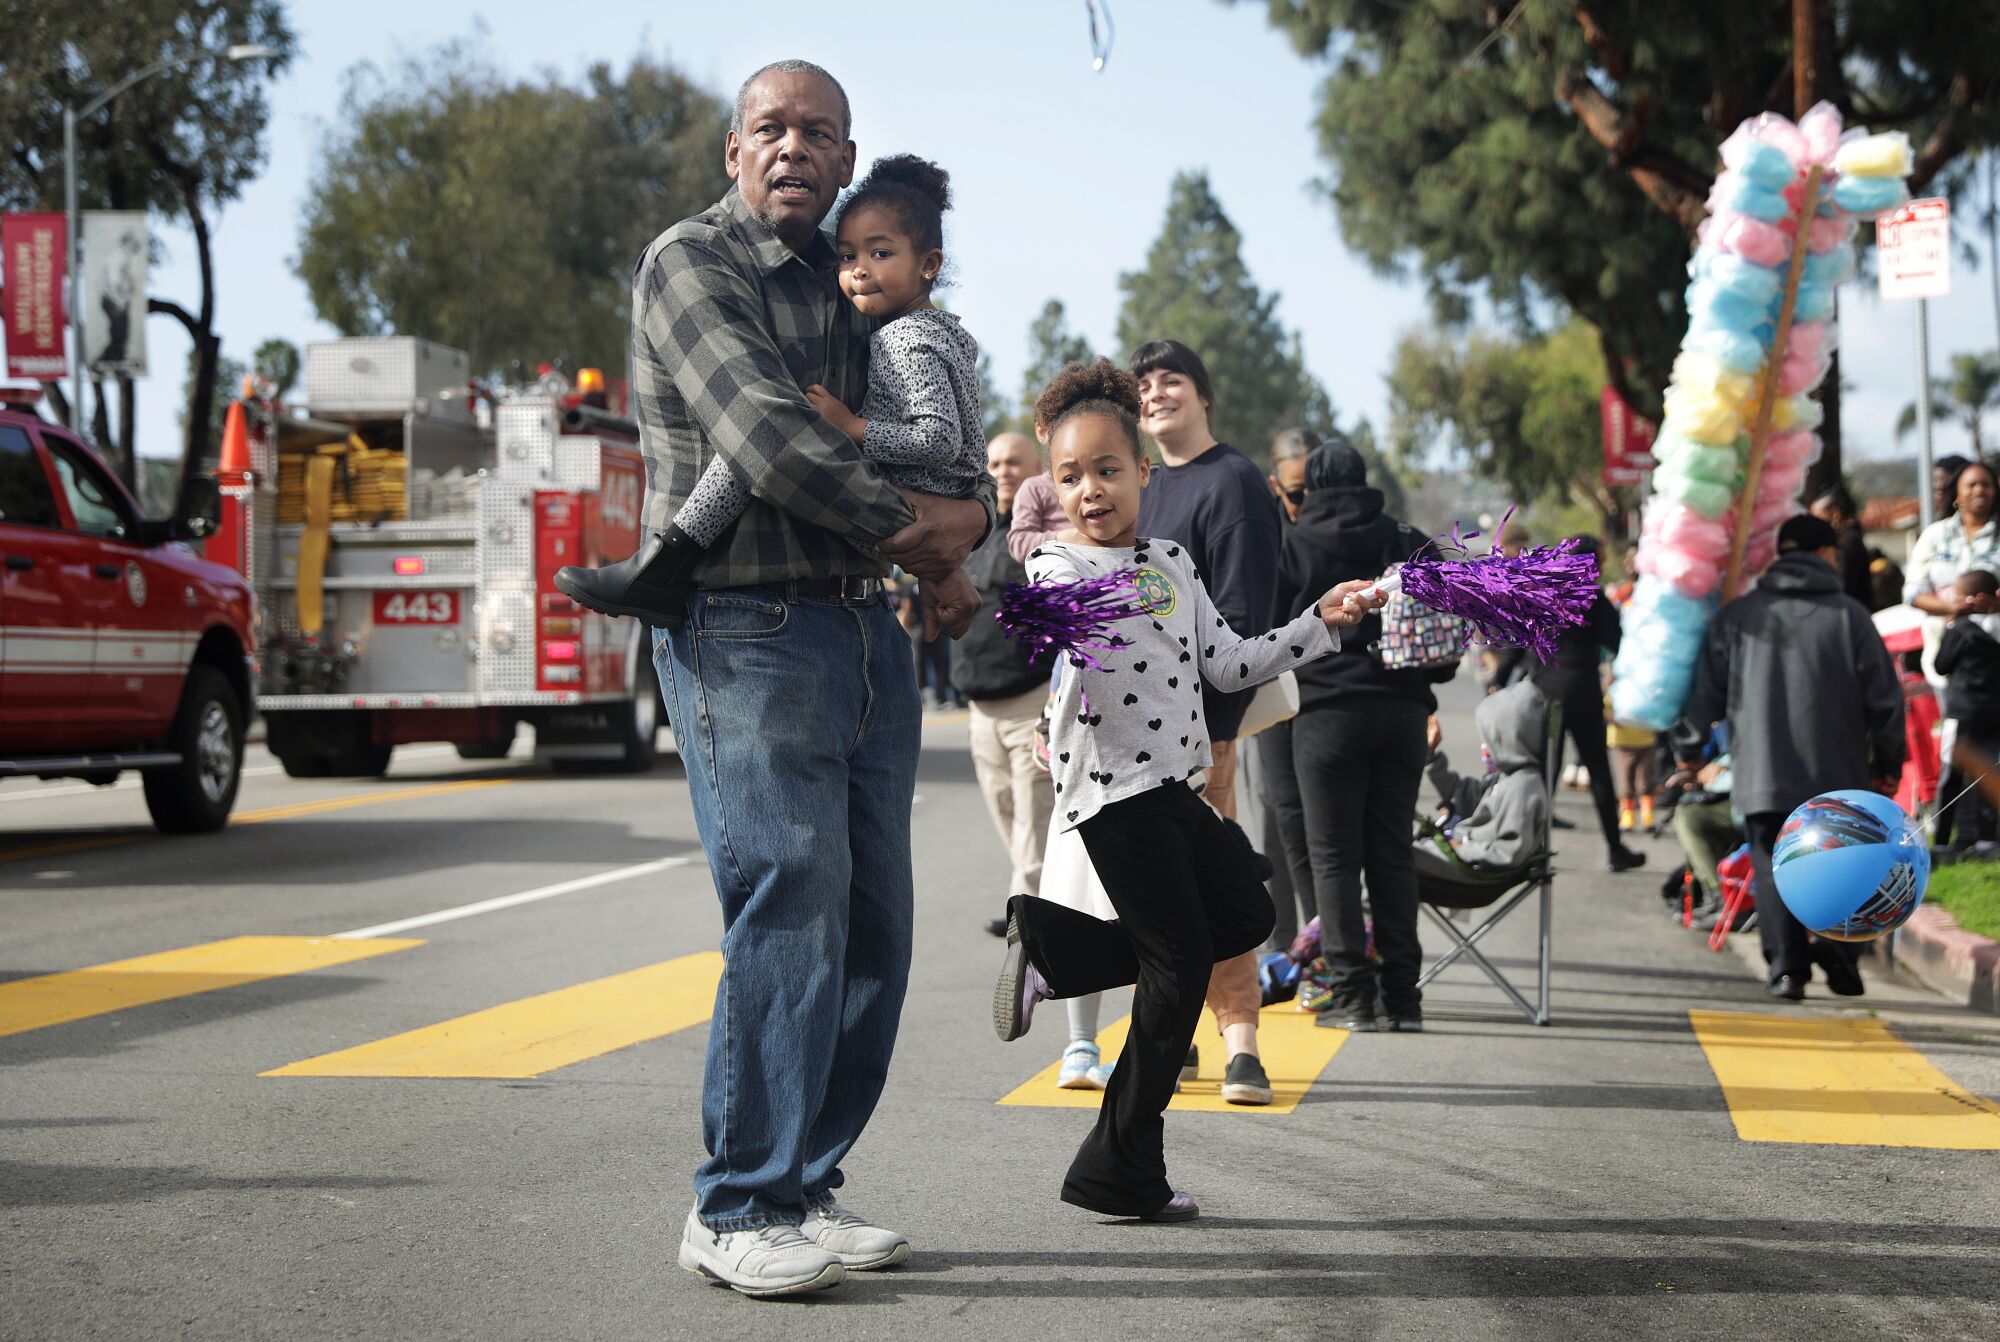 Paradegoers watch participants in the 38th annual Kingdom Day parade in Leimert Park.